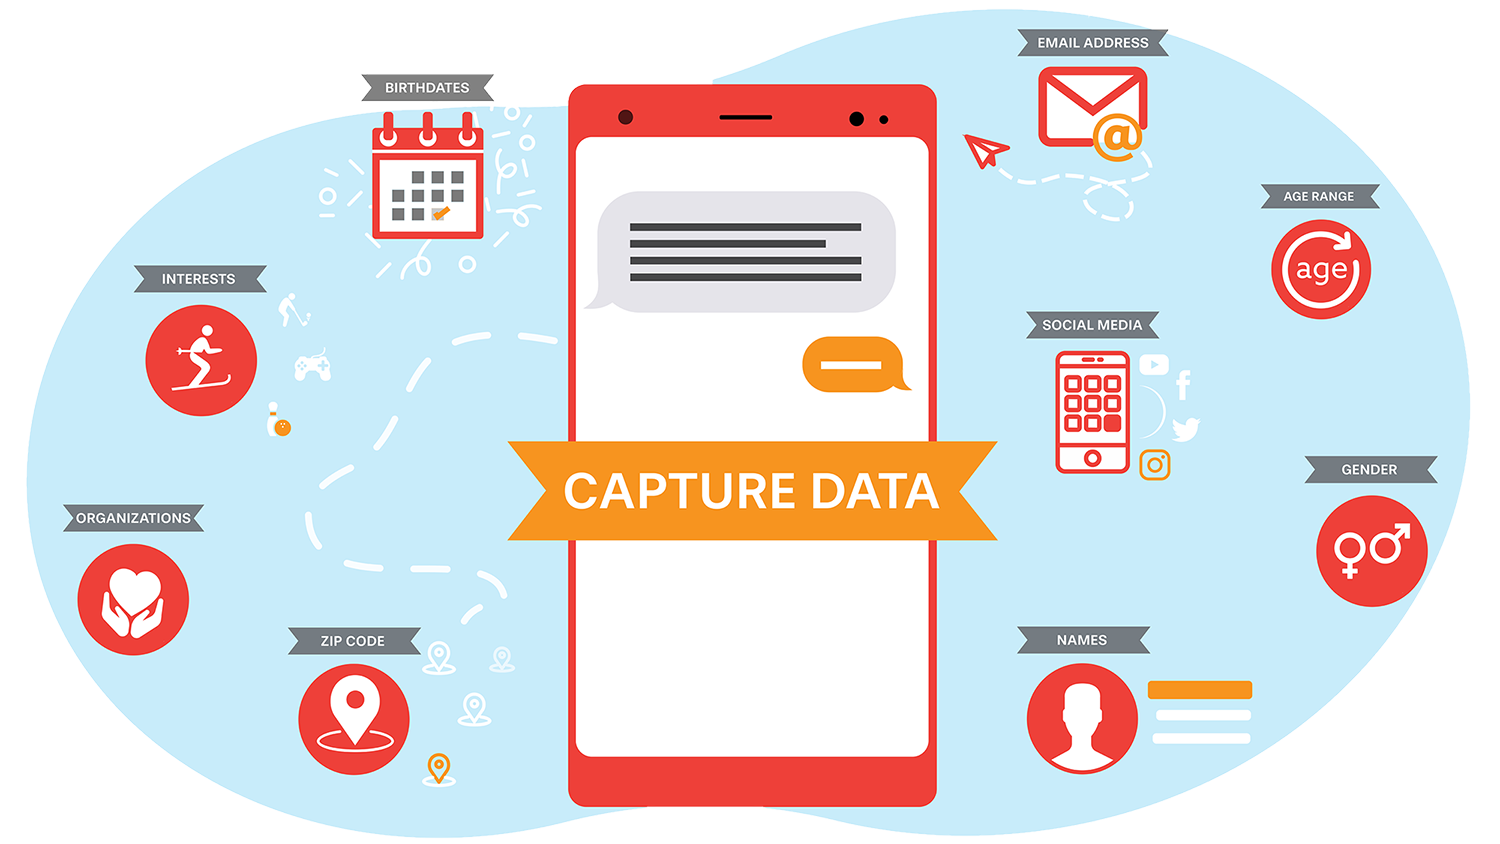 Data capture is especially powerful when the data is about so many different parts of a contact's life.